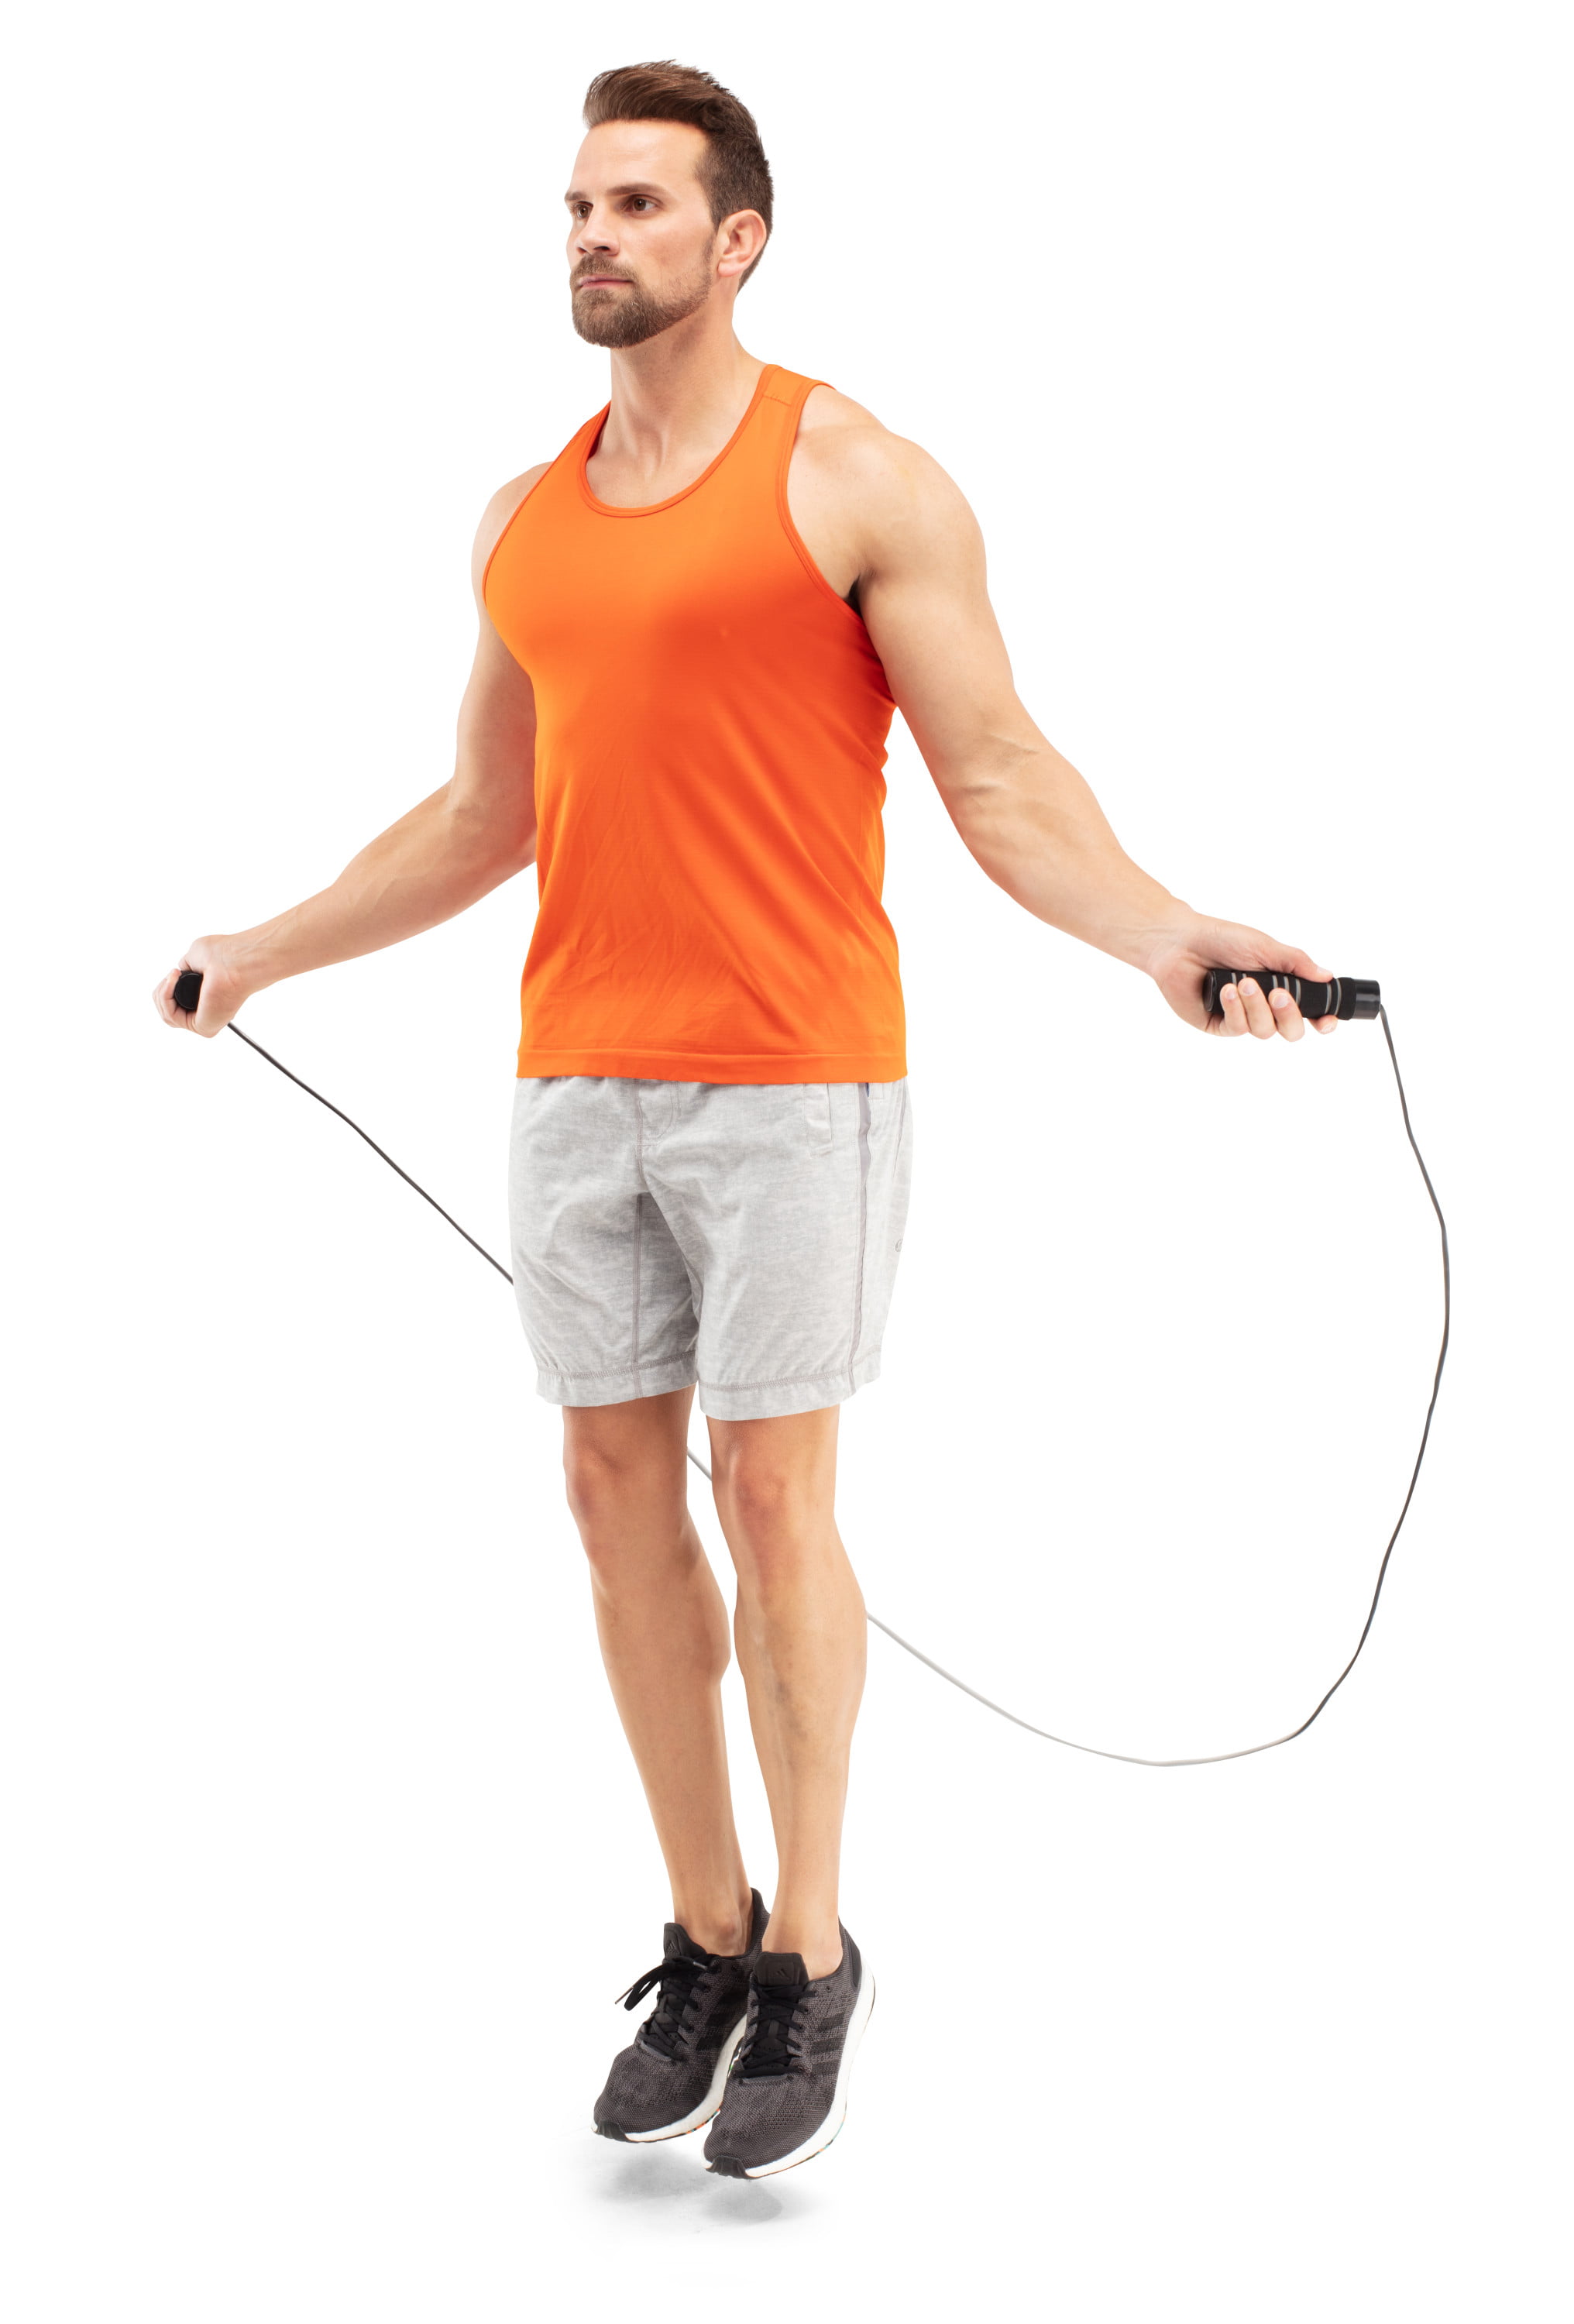 Athletic Works Adjustable Weighted Jump Rope, Adjusts up to 9' Length, Black